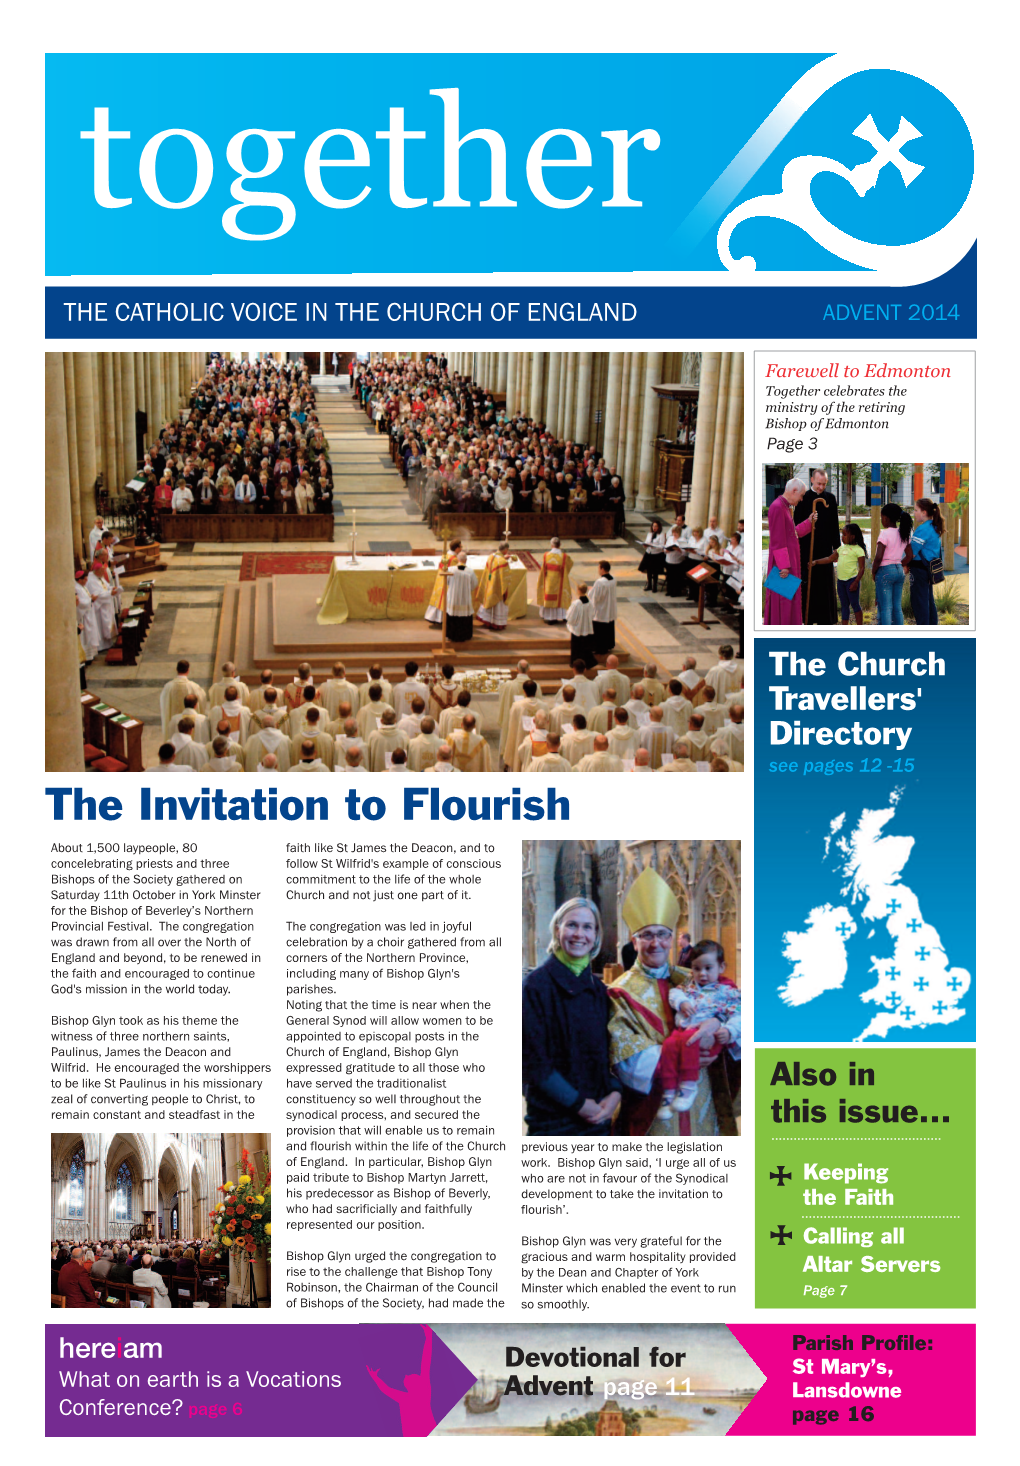 The Catholic Voice in the Church of England Advent 2014